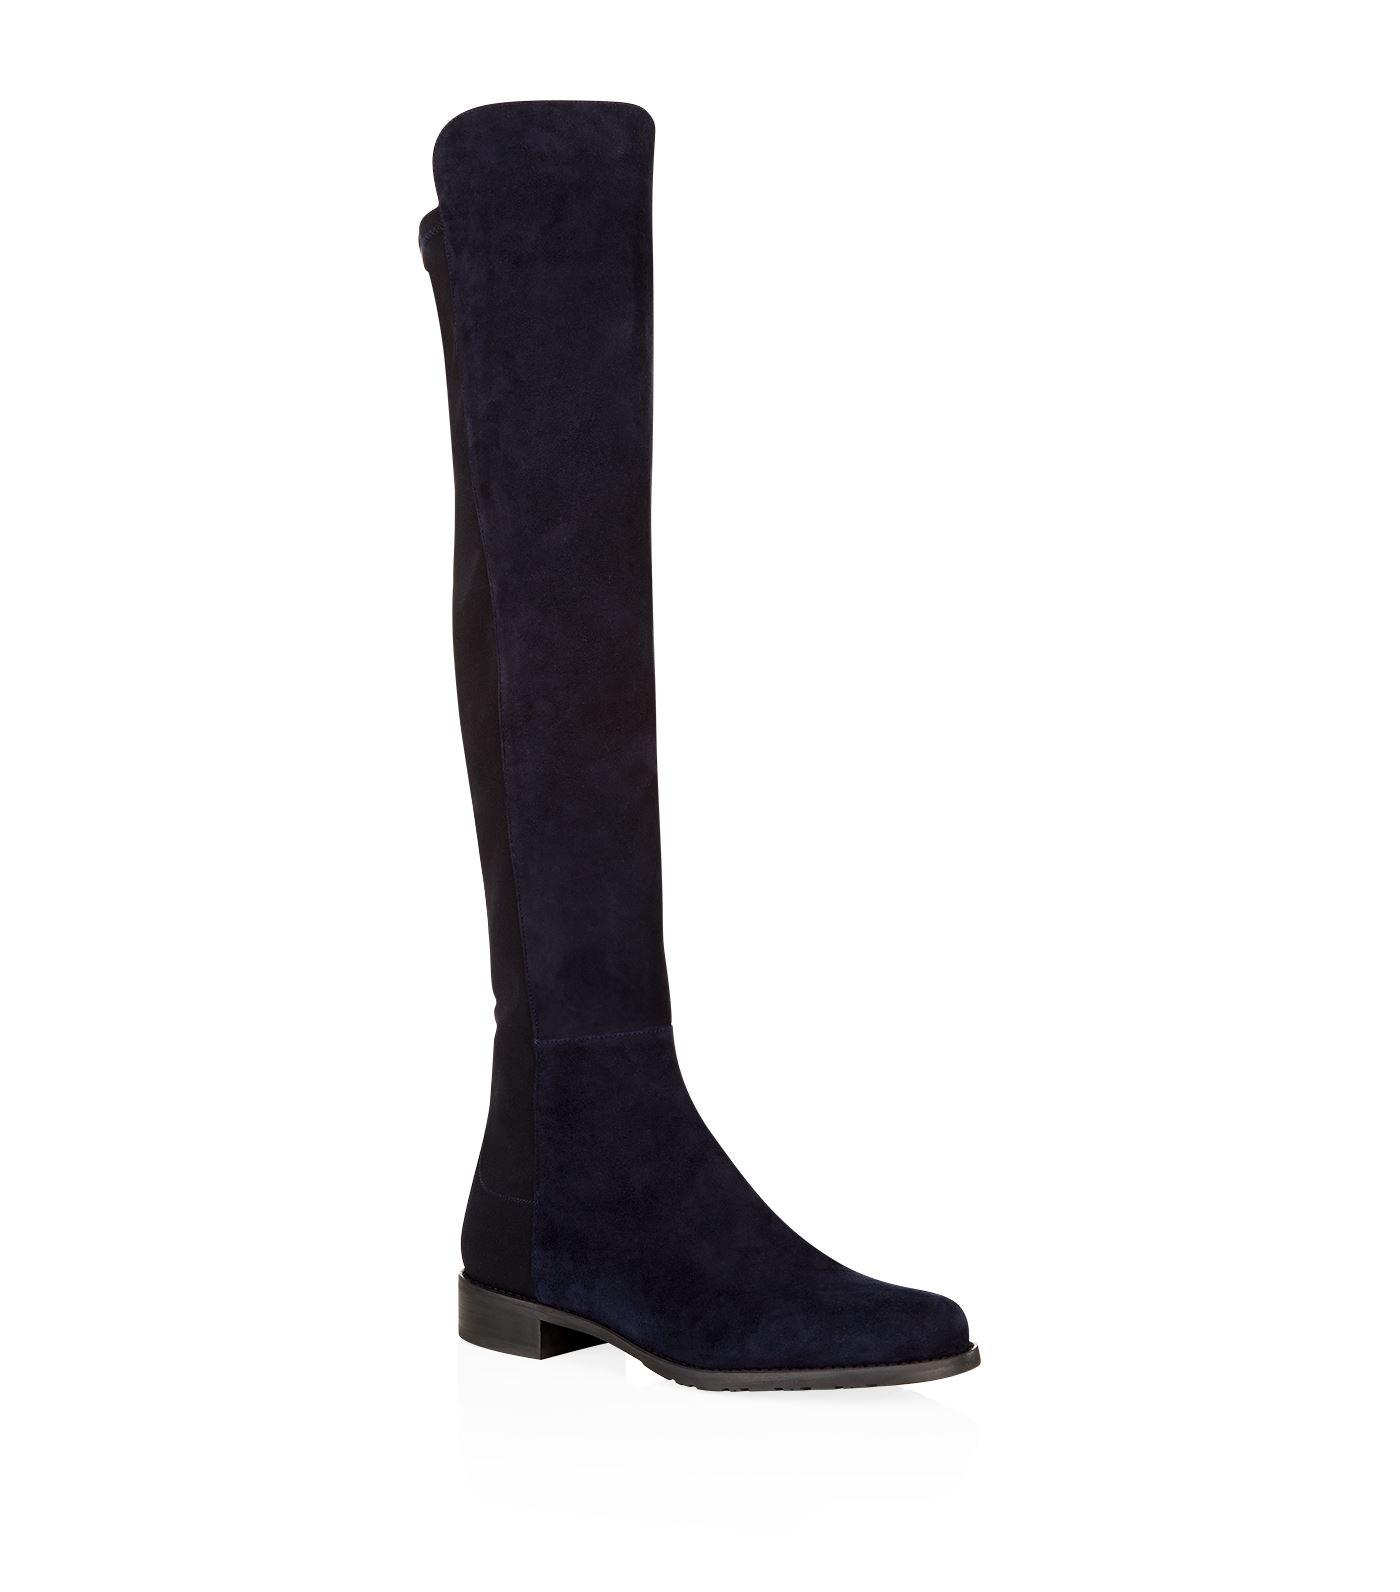 Lyst - Stuart Weitzman 5050 Stretch Suede Over The Knee Boots in Blue ...